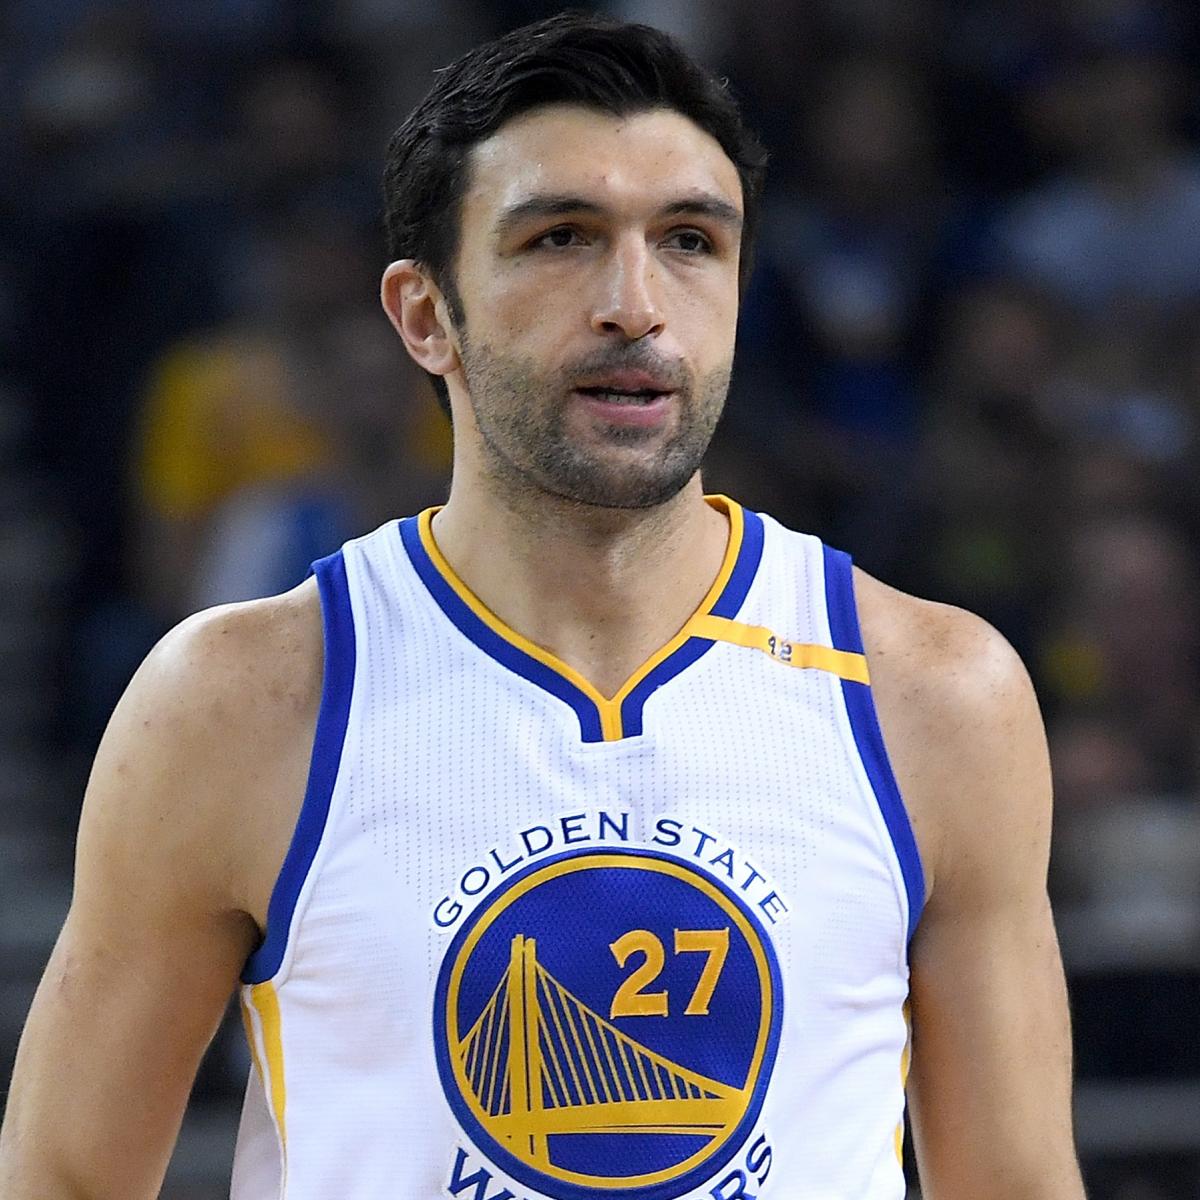 Warriors' Zaza Pachulia carries on in father's spirit